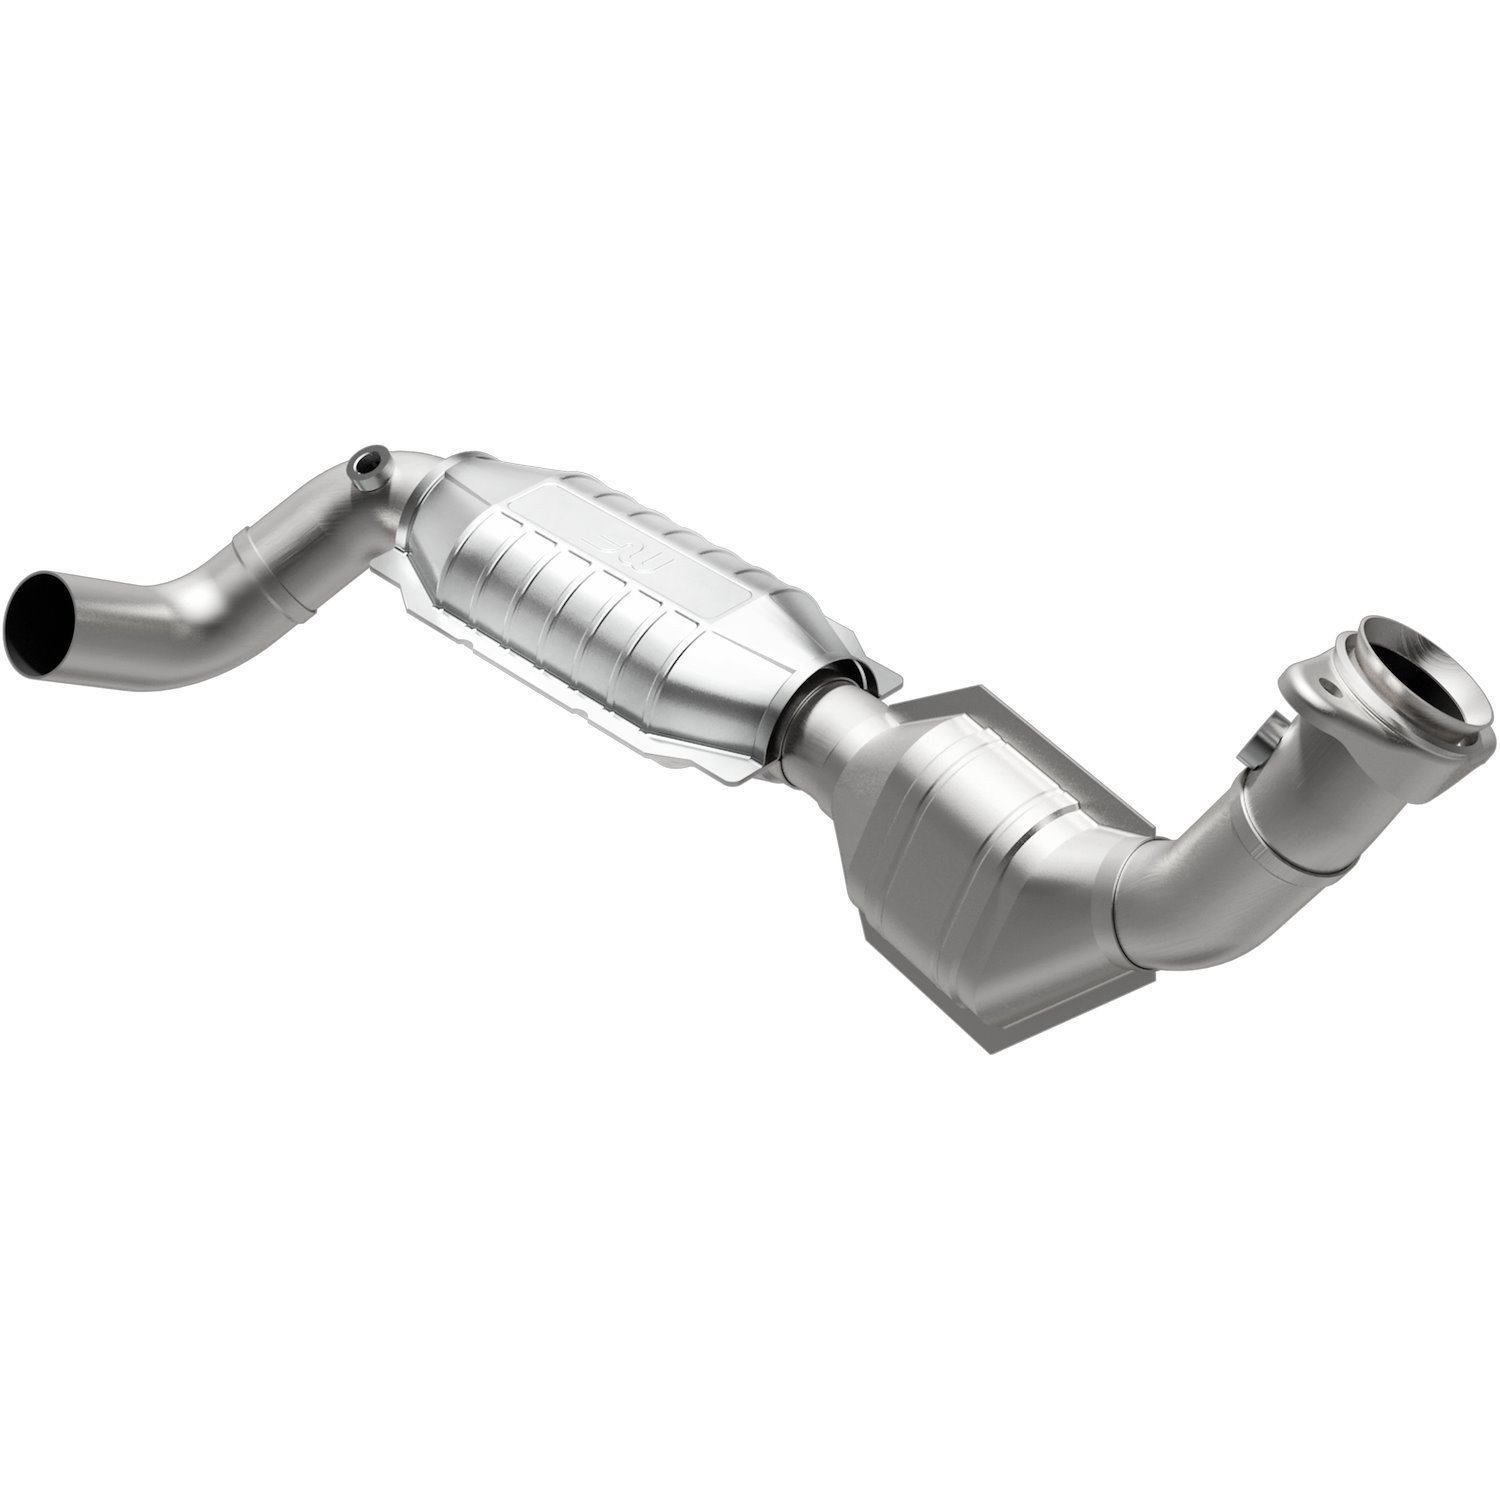 OEM Grade Federal / EPA Compliant Direct-Fit Catalytic Converter 51324